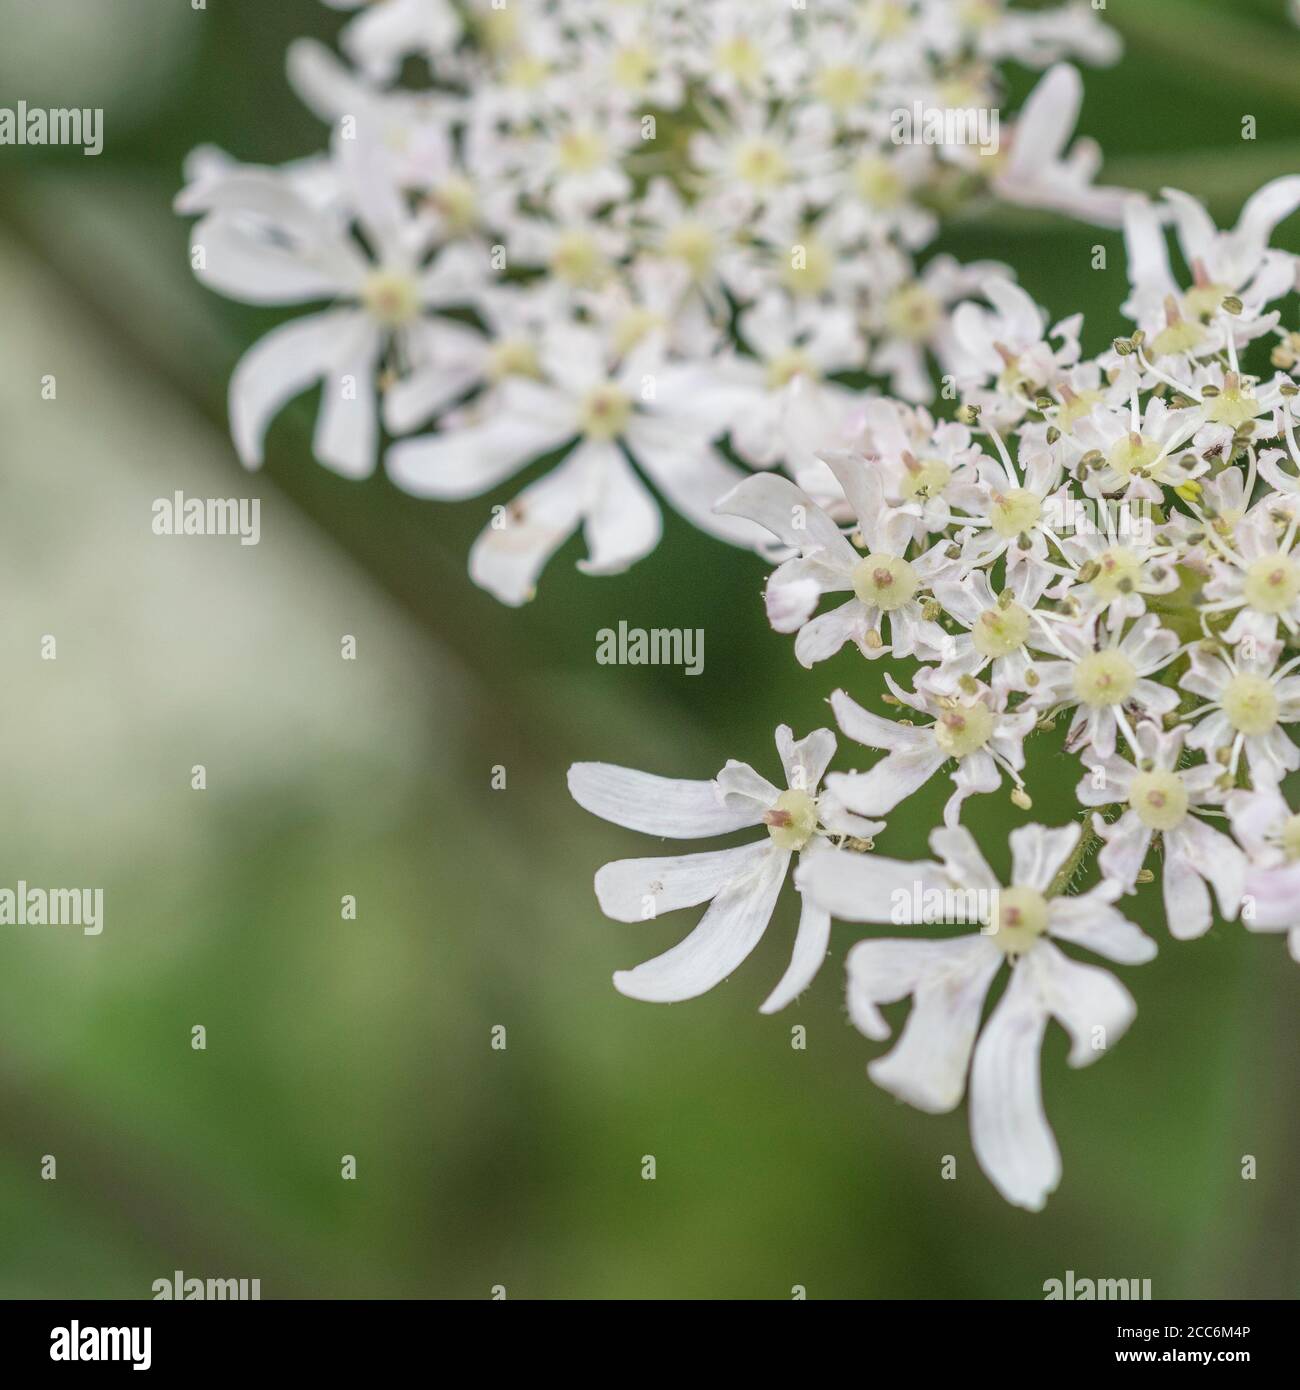 Macro close-up shot of Hogweed / Cow Parsnip flowers. A common UK umbellifer weed the sap of which can blister skin. Common weeds UK. Stock Photo